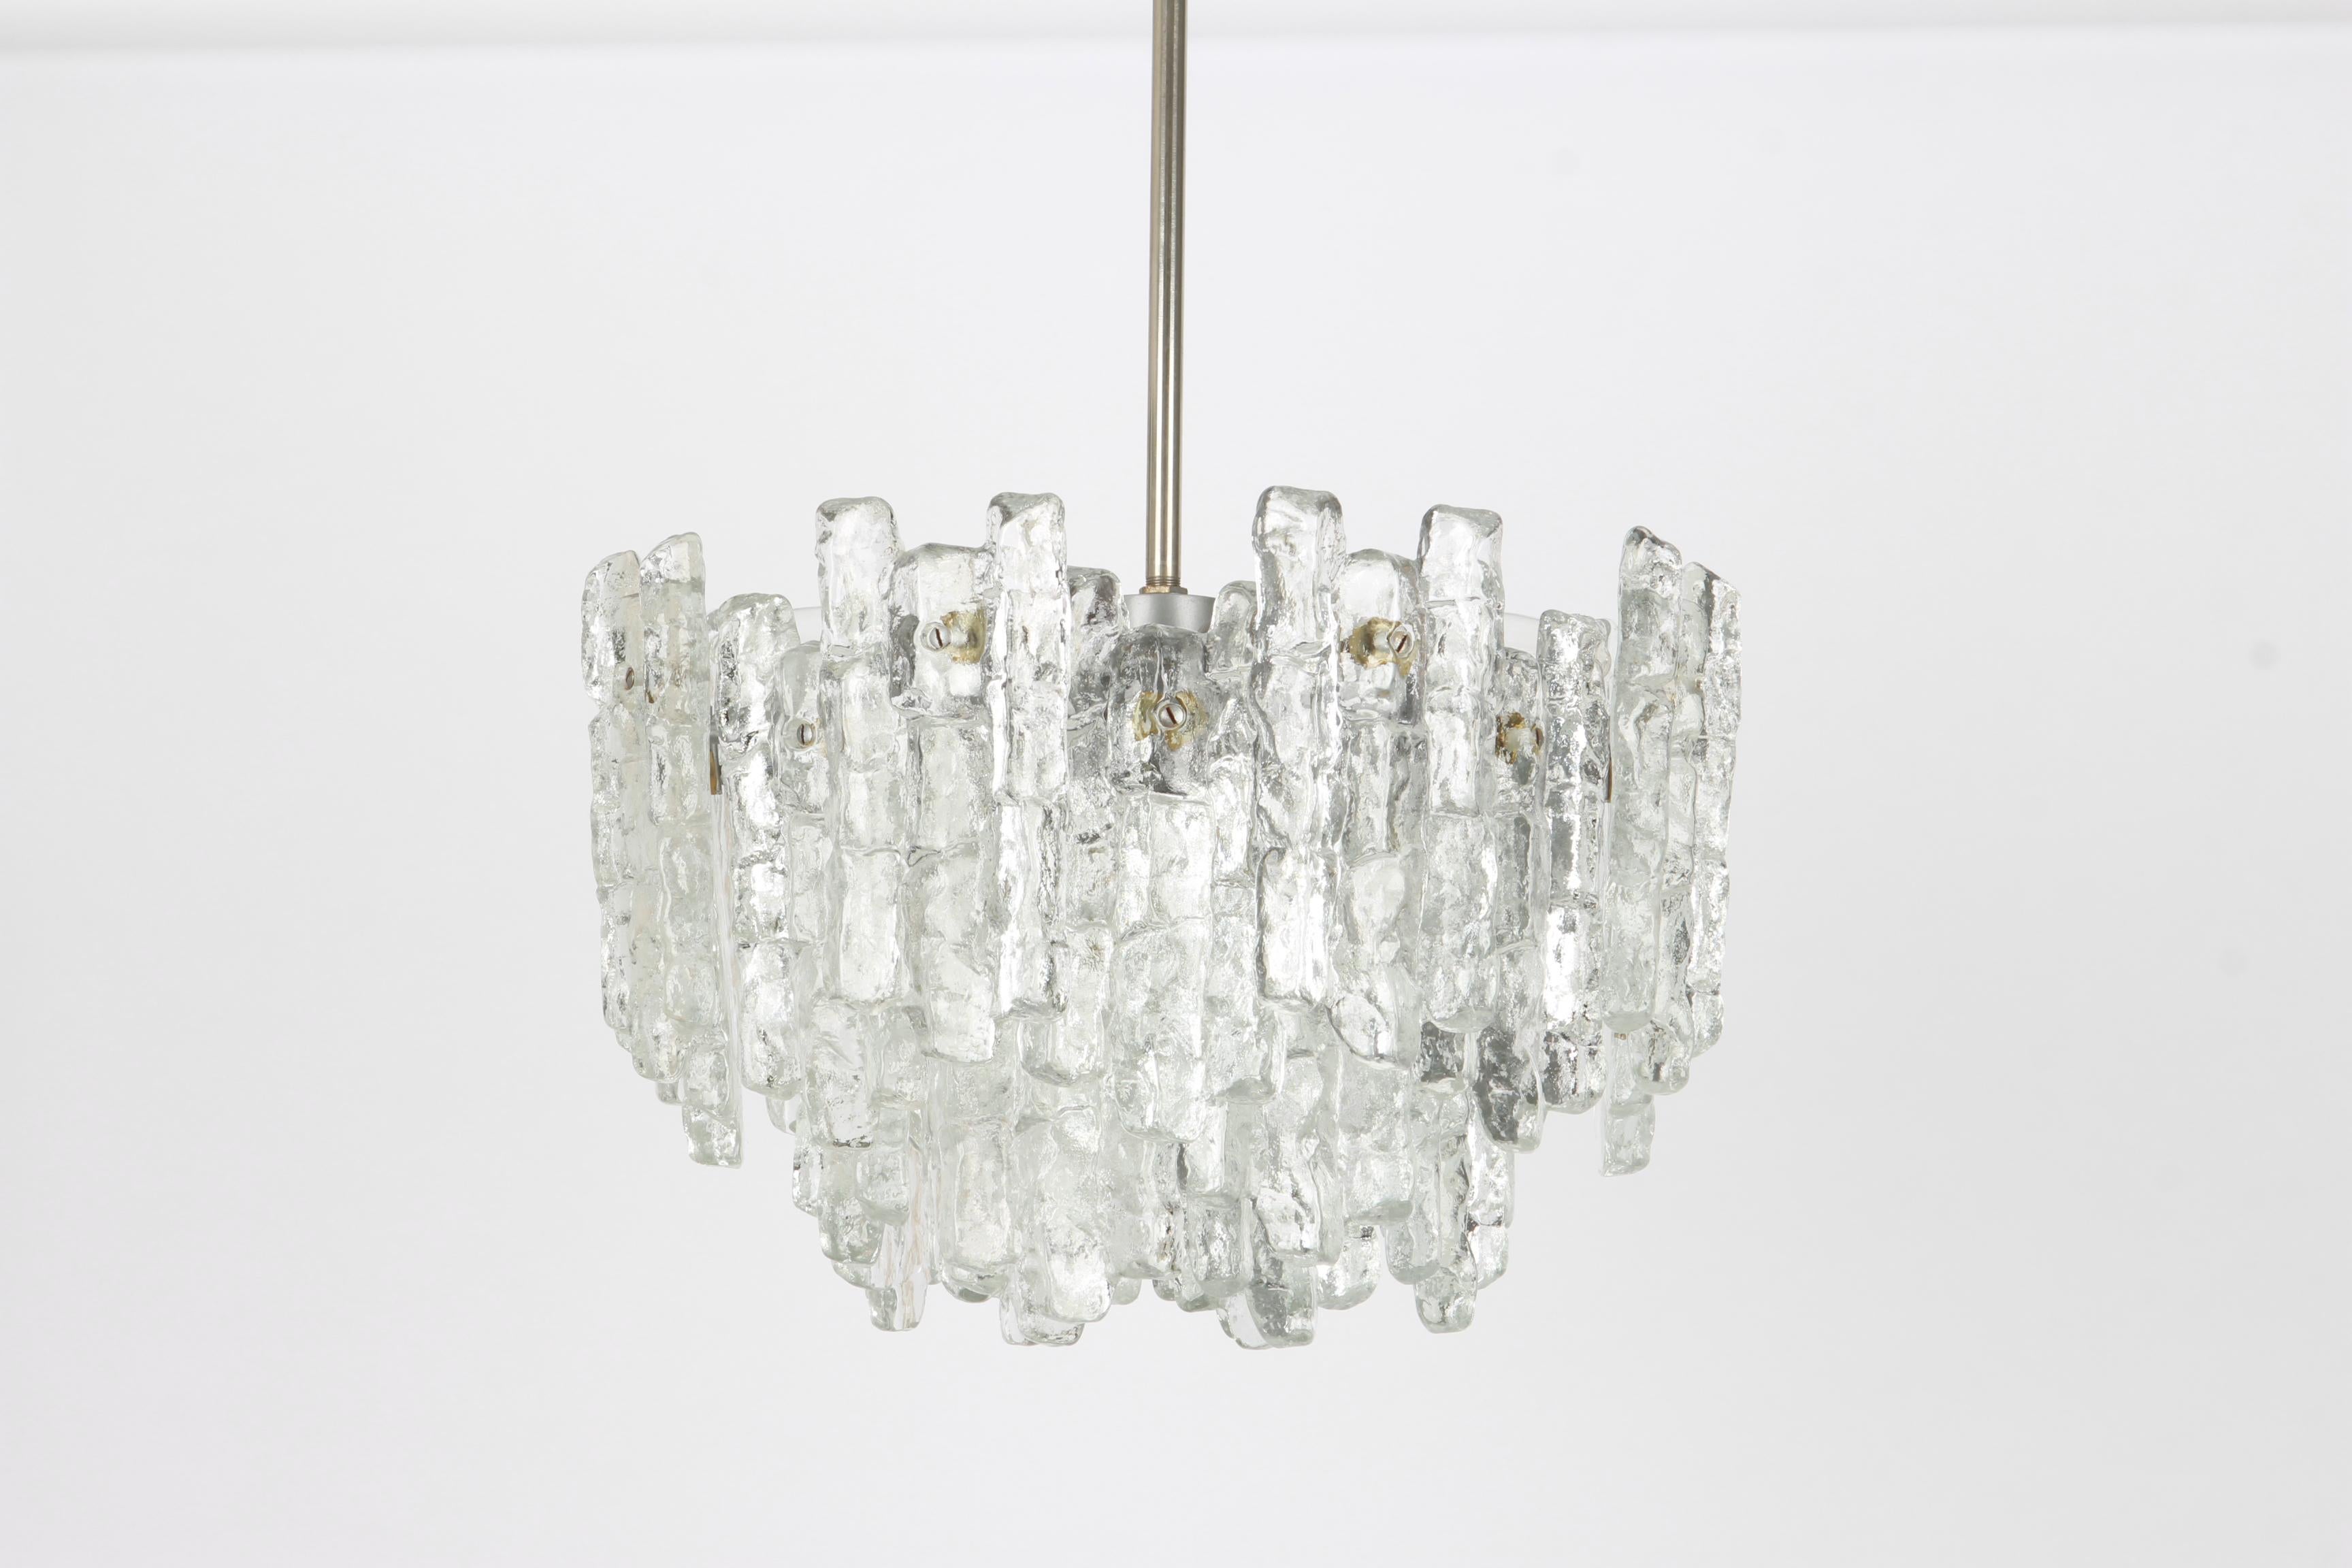 1 of 4 Large Murano Ice Glass Chandelier by Kalmar, Austria, 1960s For Sale 4